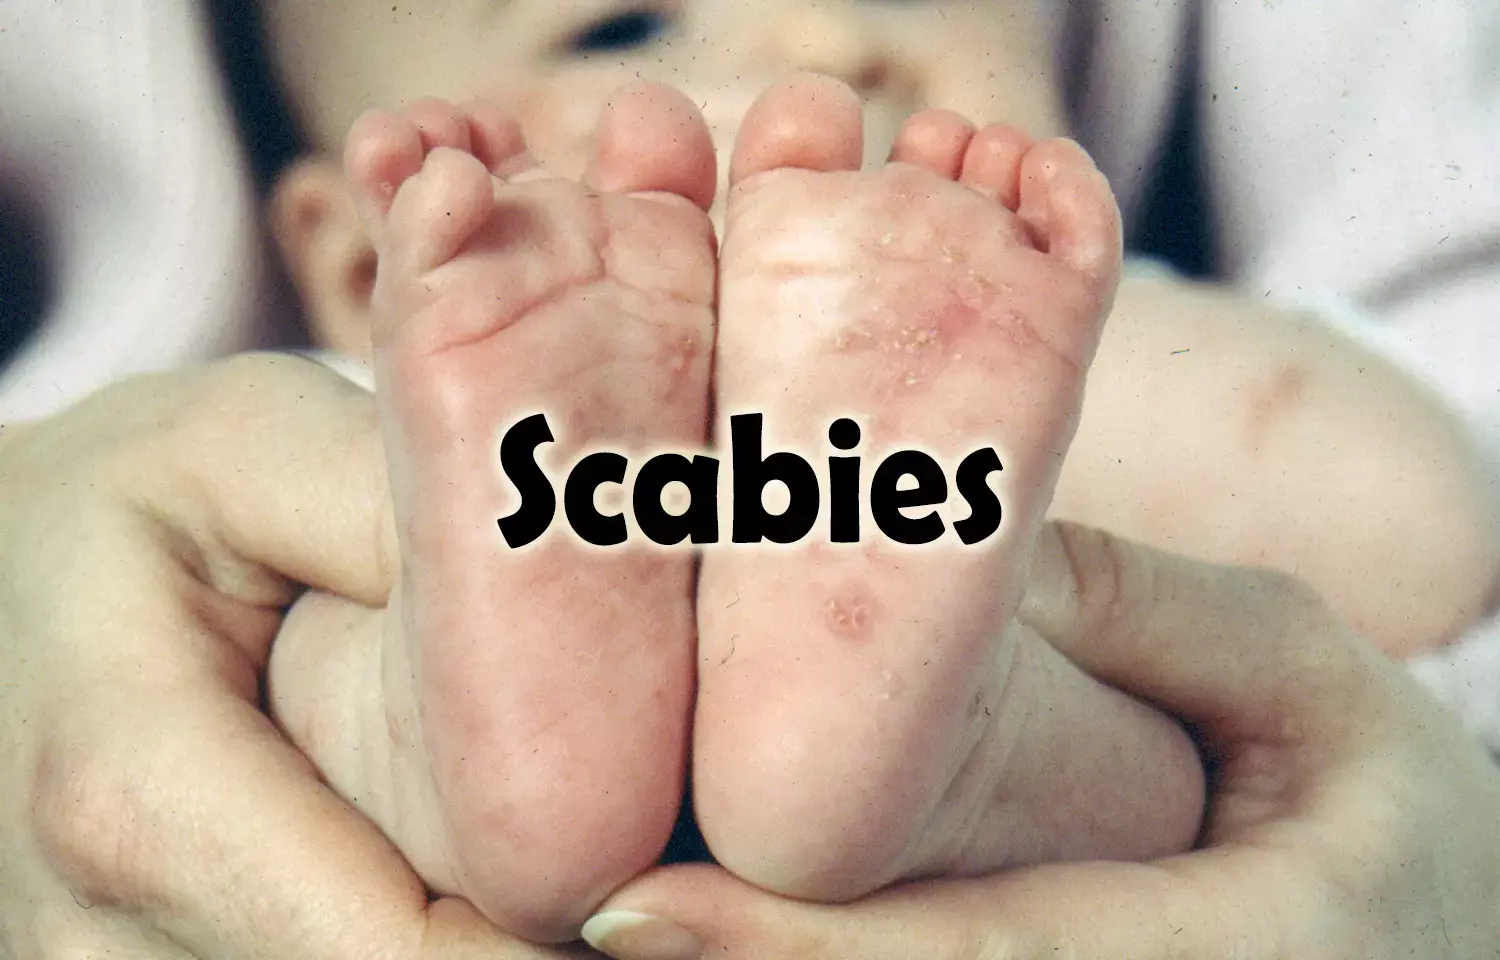 Single dose of Ivermectin just as effective as two for scabies treatment